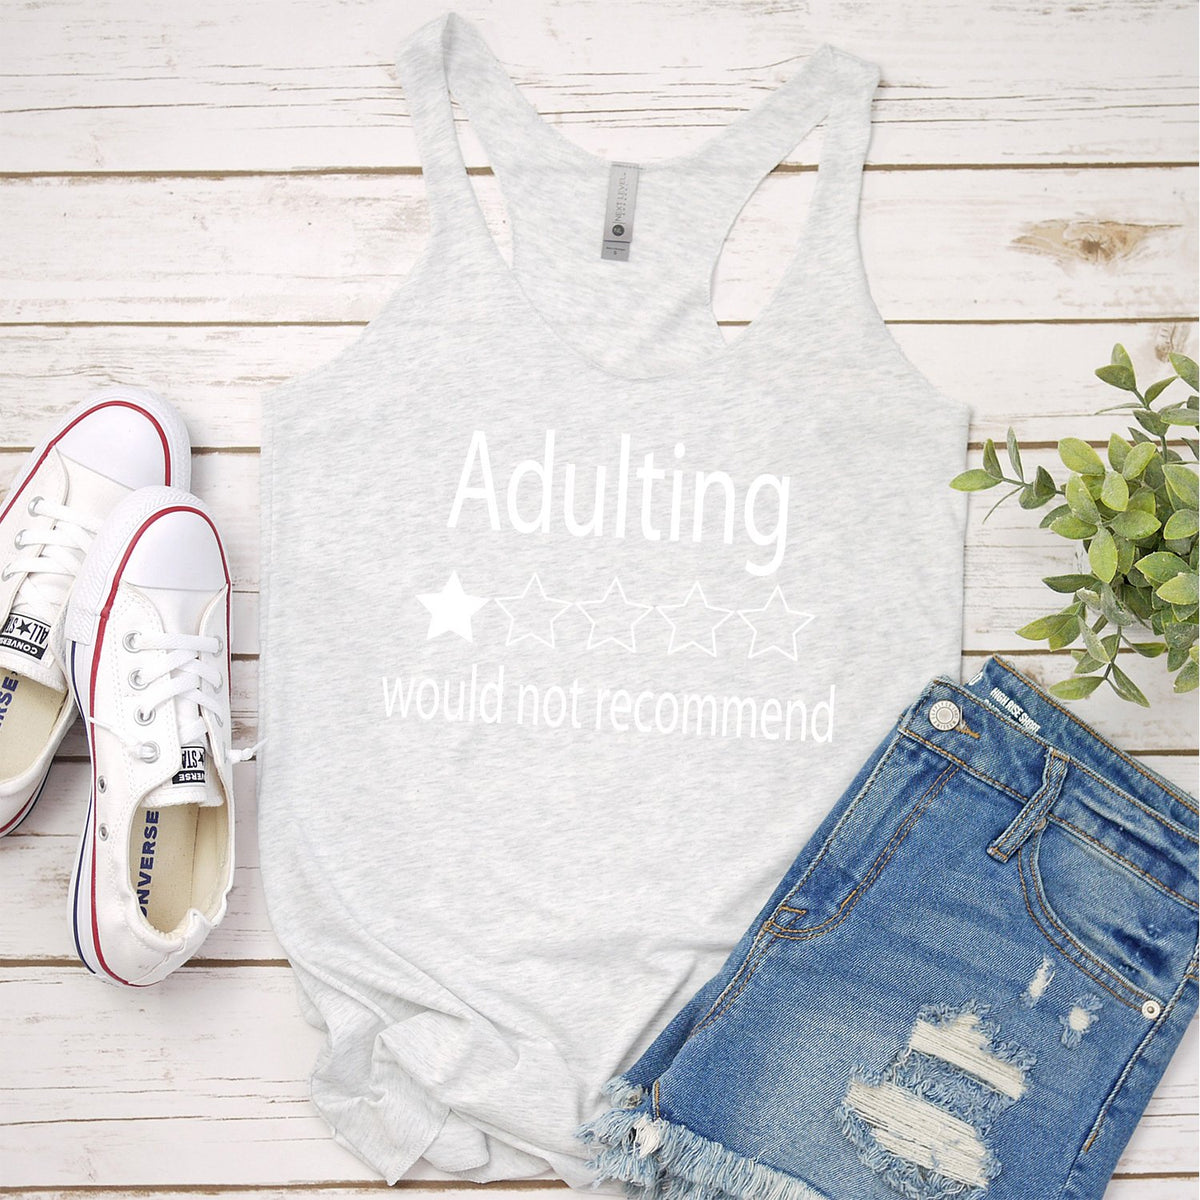 Adulting Would Not Recommend - Tank Top Racerback